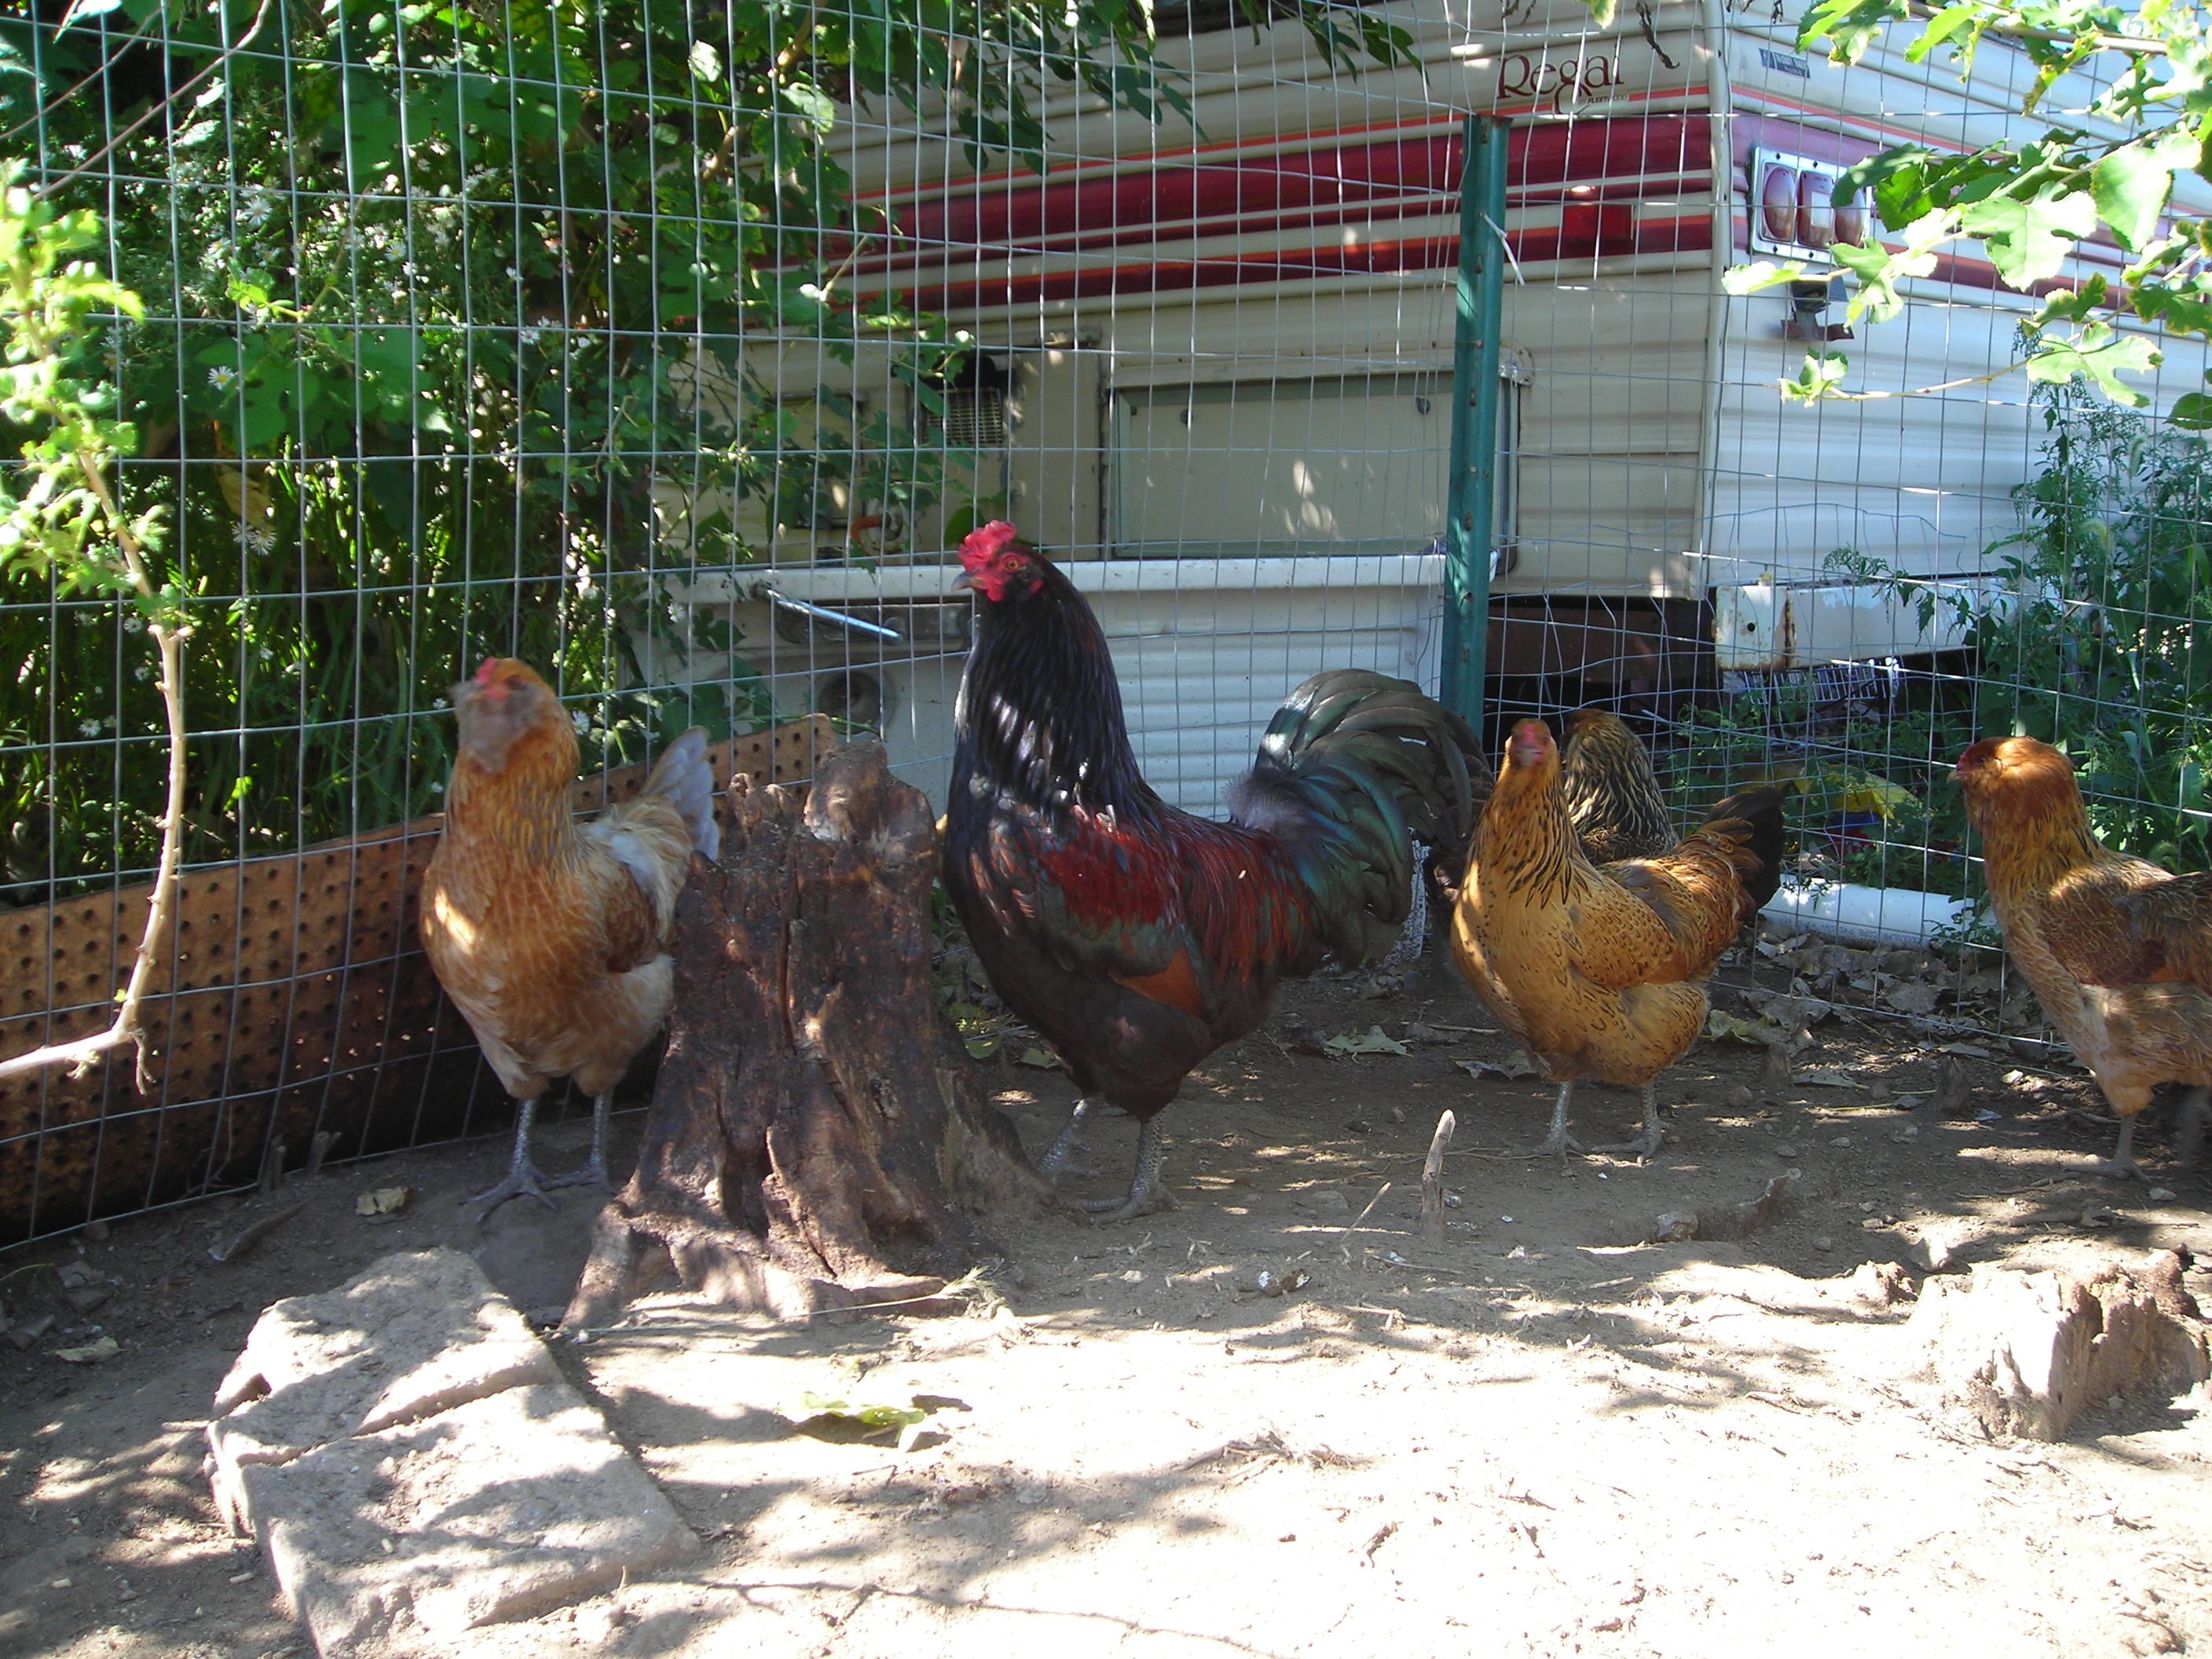 My other rooster and his hens, does someone know what breed he is?